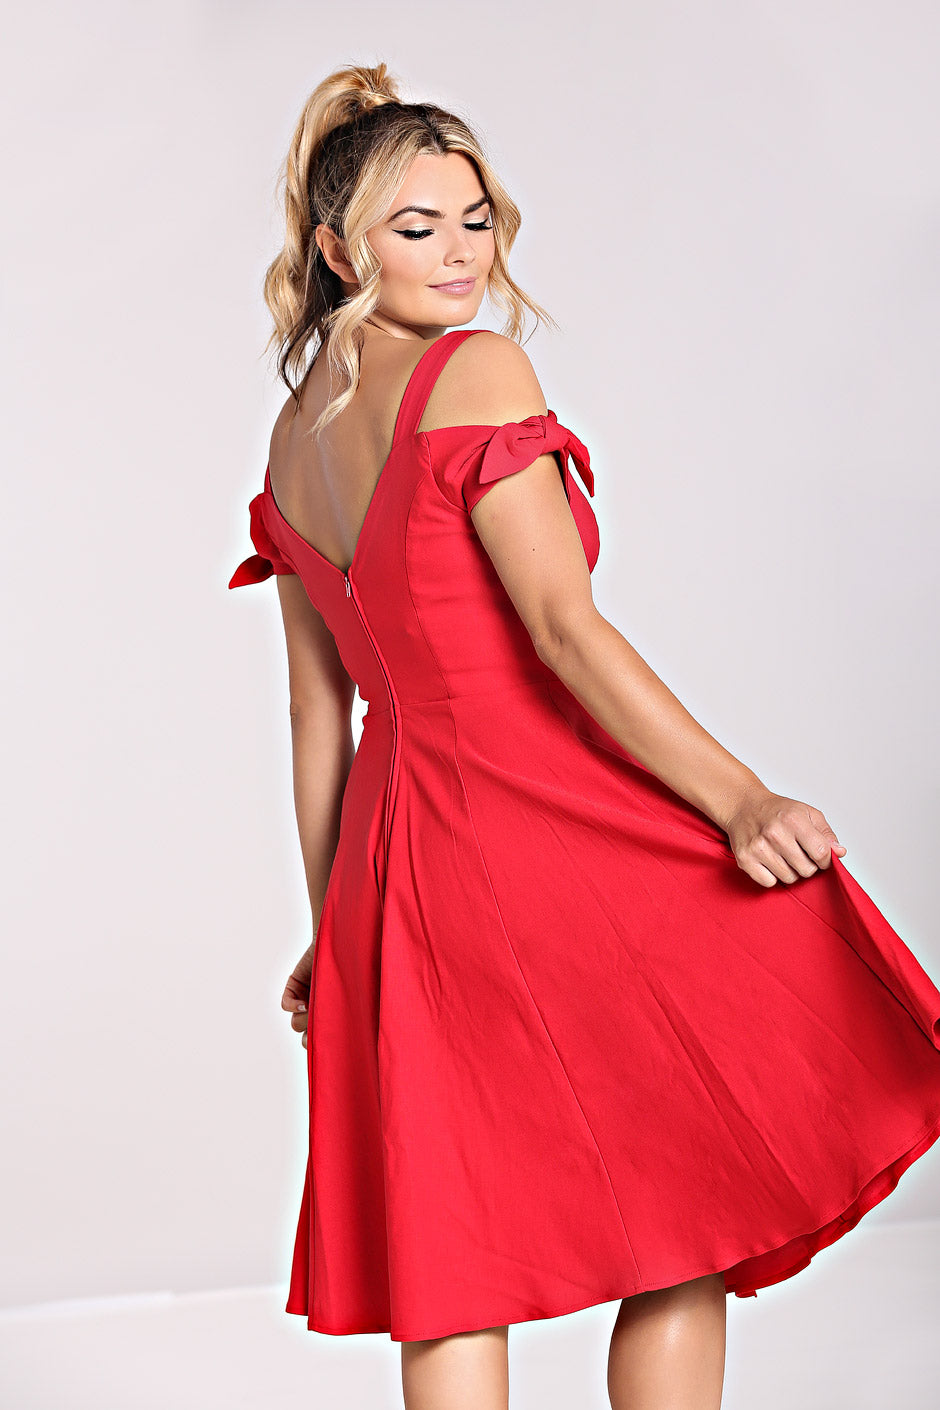 Blonde woman wearing her hair in a ponytail and a red mid length dress, swishing her skirt